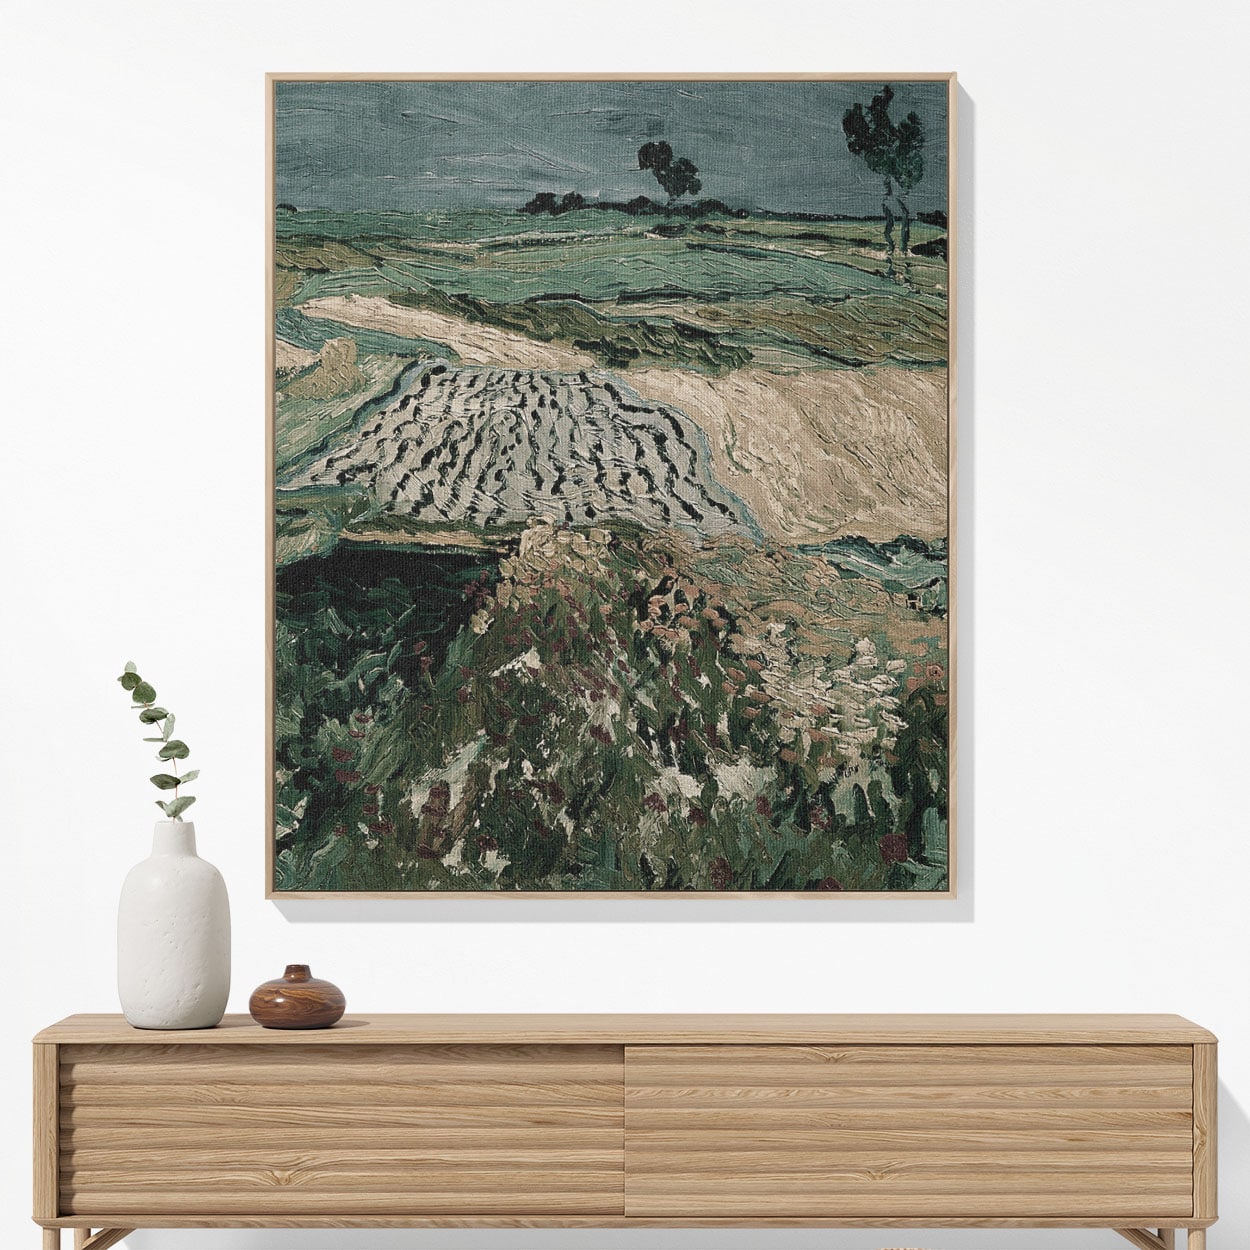 Rolling Hills Woven Blanket Woven Blanket Hanging on a Wall as Framed Wall Art